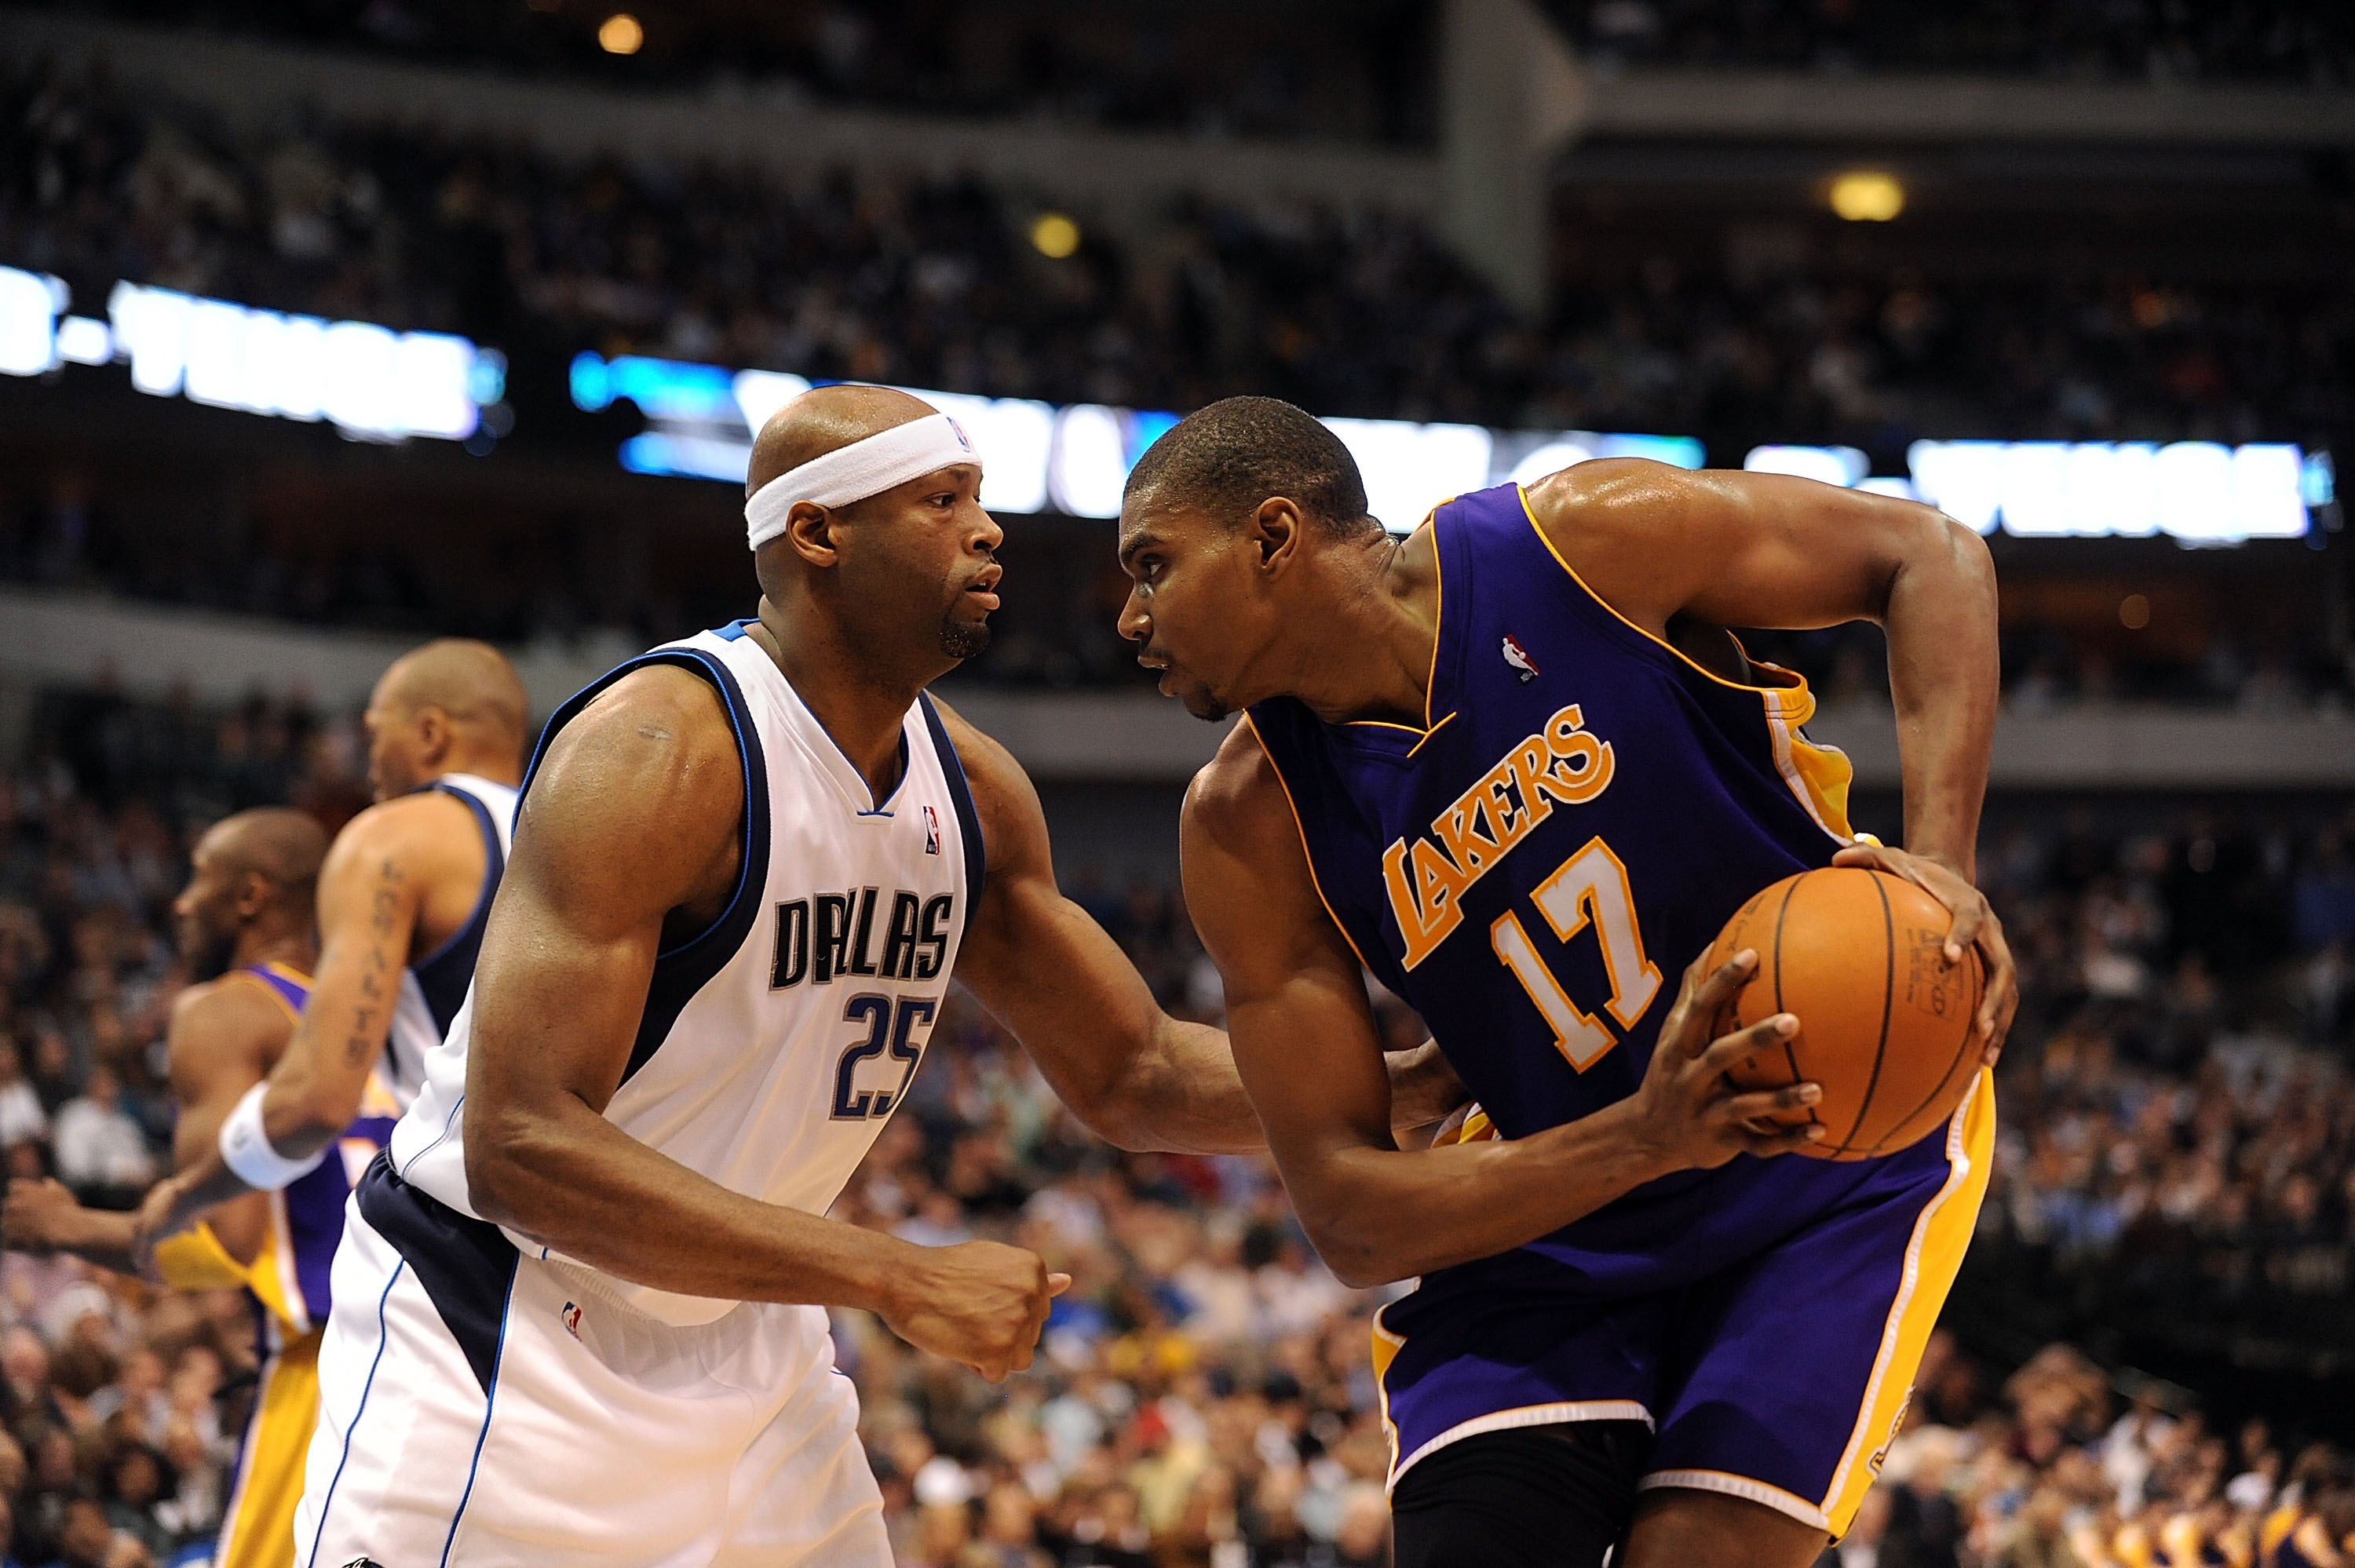 DALLAS - JANUARY 13:  Center Andrew Bynum #17 of the Los Angeles Lakers and Erick Dampier #25 of the Dallas Mavericks on January 13, 2010 at American Airlines Center in Dallas, Texas.  NOTE TO USER: User expressly acknowledges and agrees that, by download